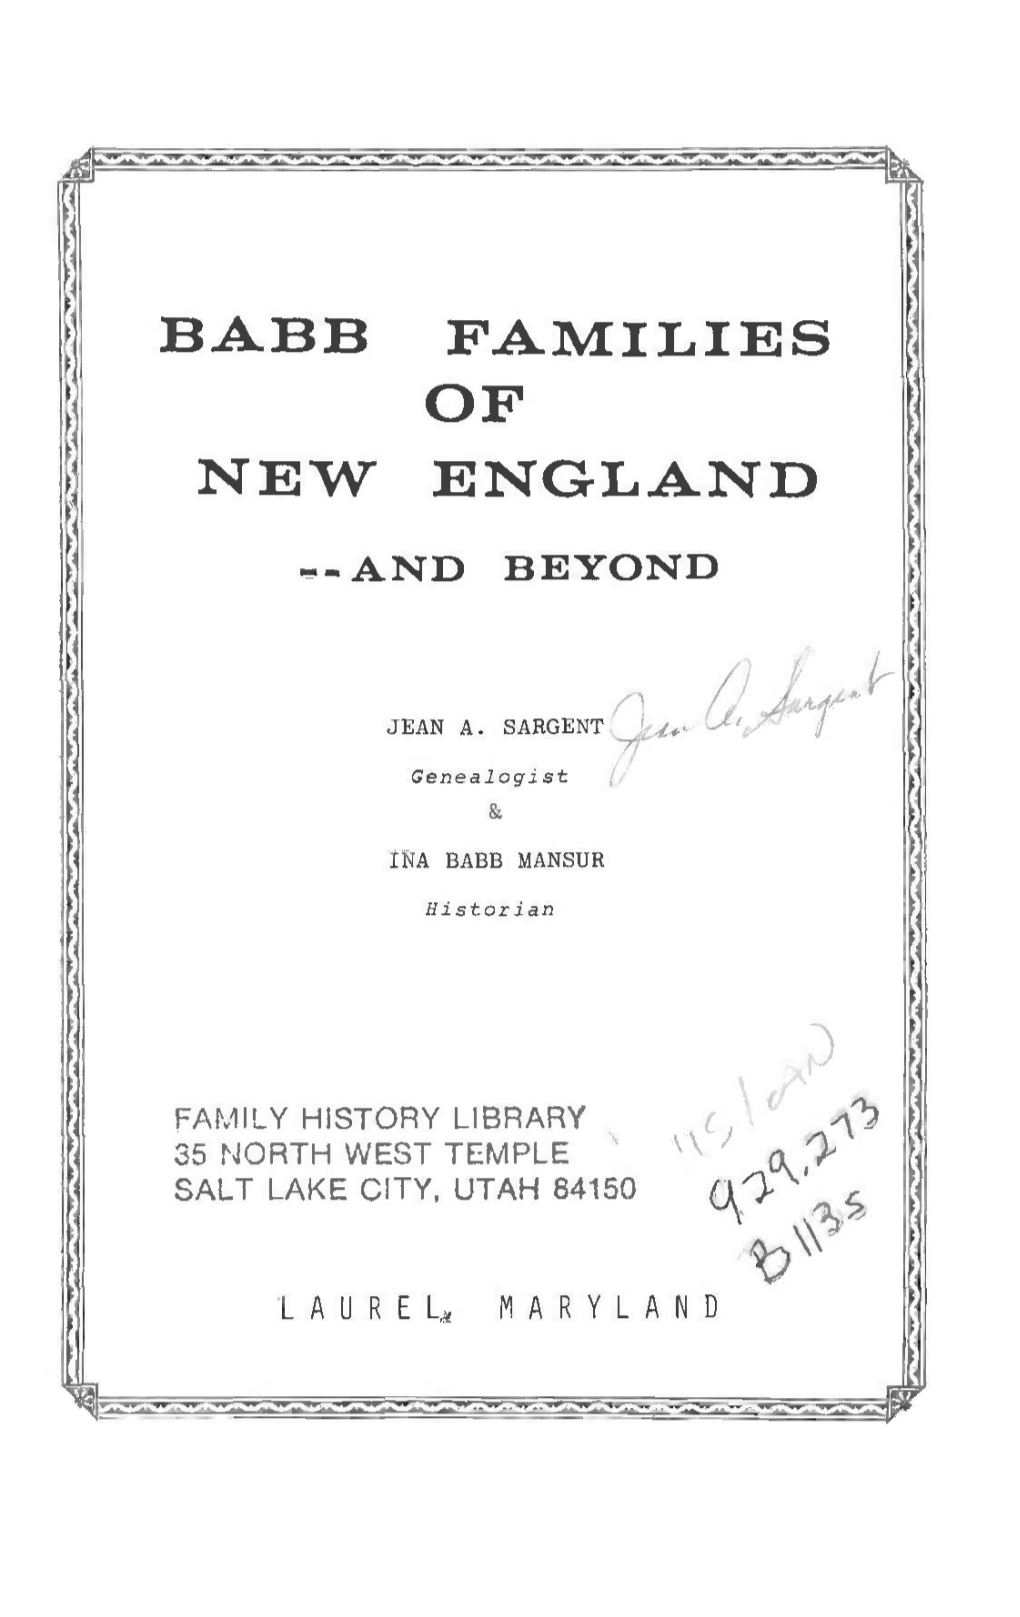 Babb Families of New England and Beyond